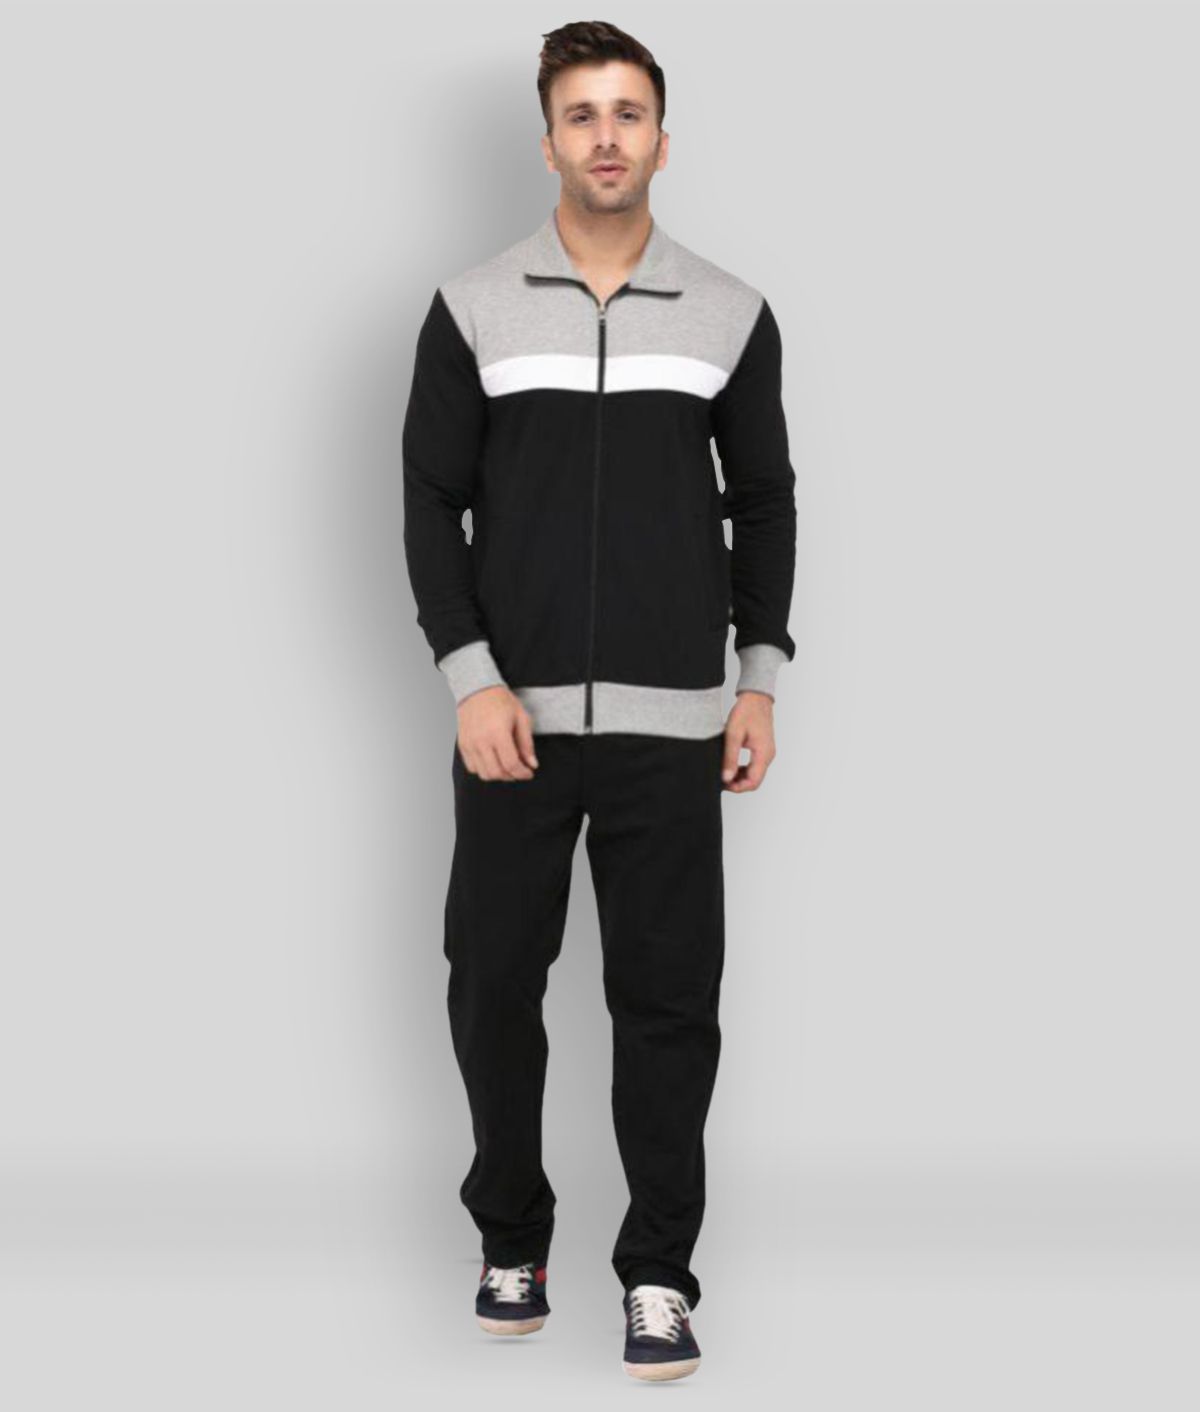     			Vivid Bharti - Black Fleece Relaxed Fit Colorblock Men's Sports Tracksuit ( Pack of 1 )